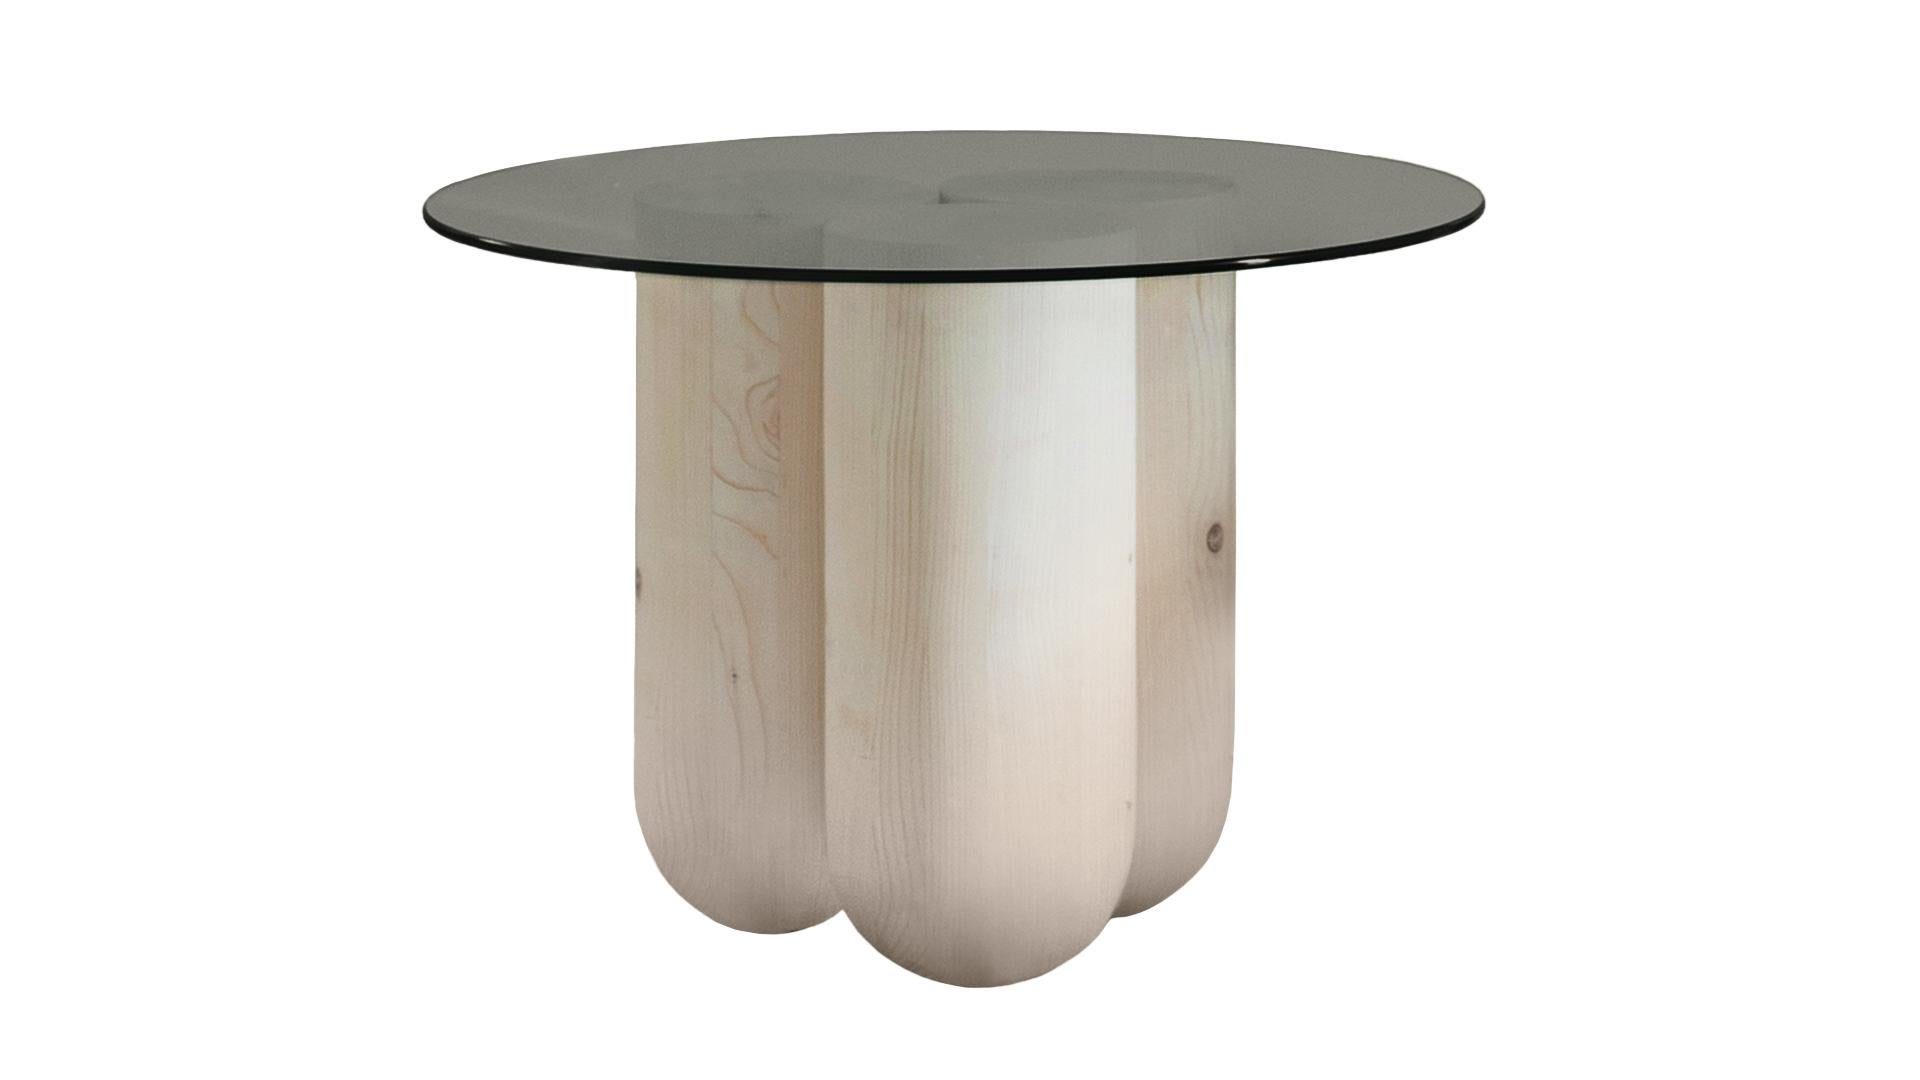 Mia Side Table by LI-AN-LO Studio
Dimensions: ø 70 x 50 cm.
Materials: Spruce and bronze tempered glass.

Clear or bronze coloured glass top options available. Please contact us.

MIA is a side table with a playfully soft shape. The base,